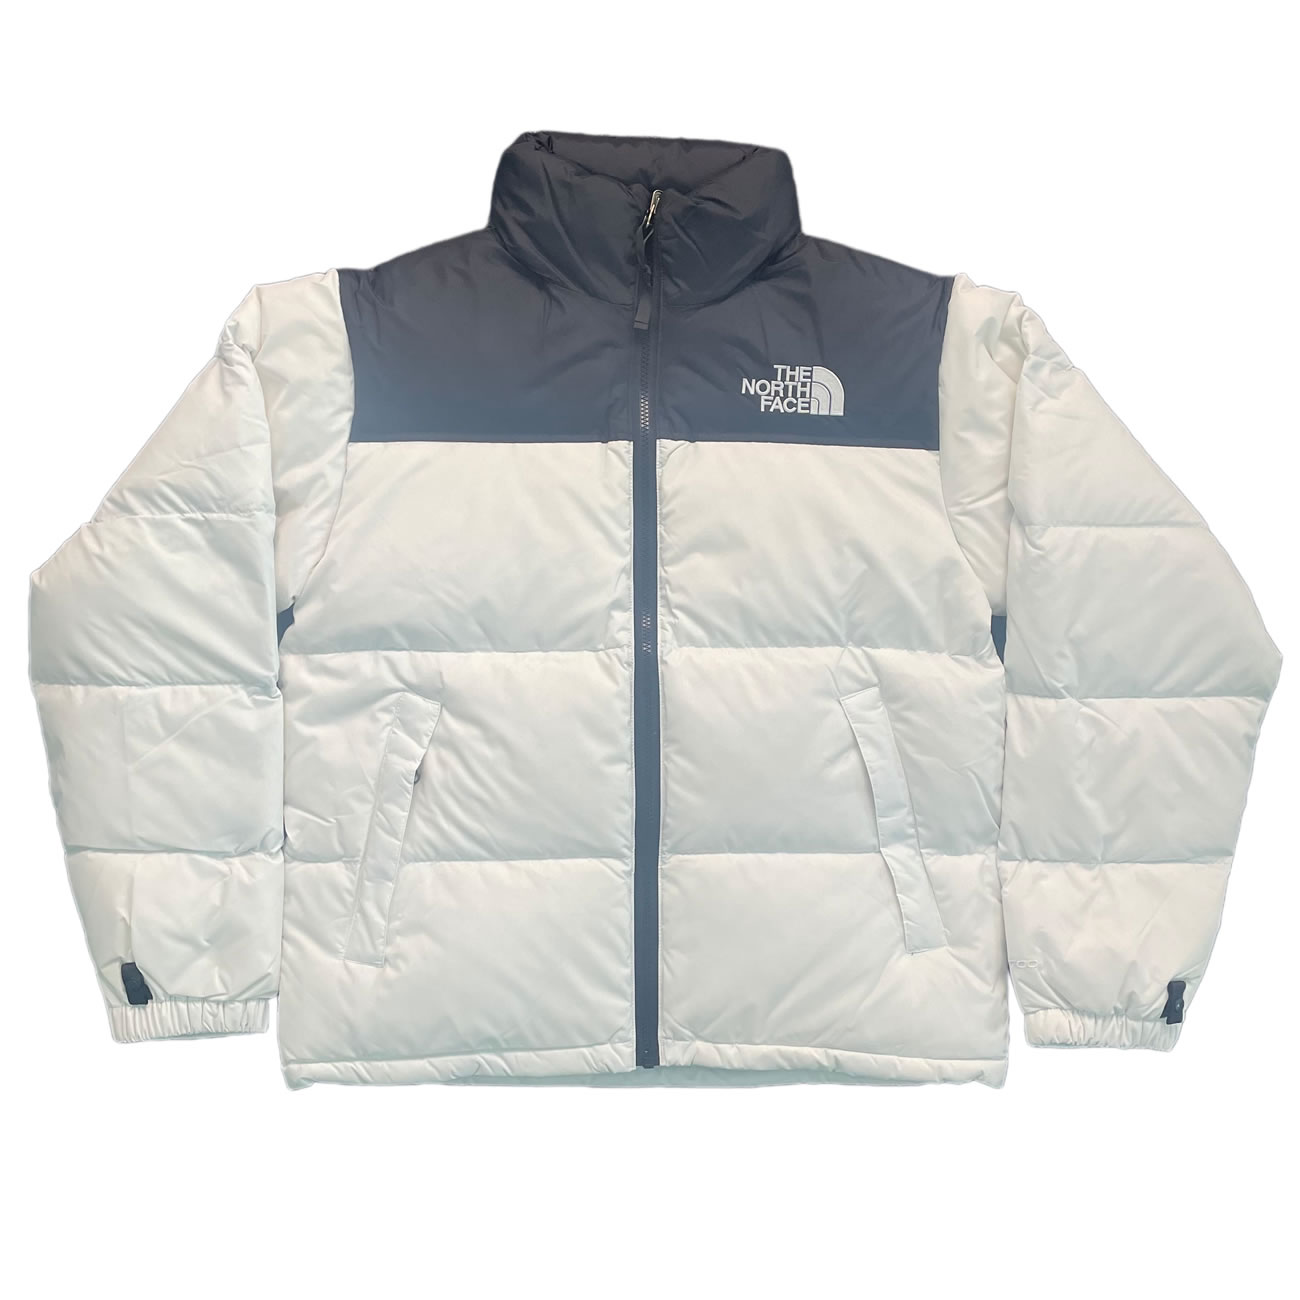 The North Face 1996 Retro Nuptse Packable Jacket Fw21 (3) - newkick.org